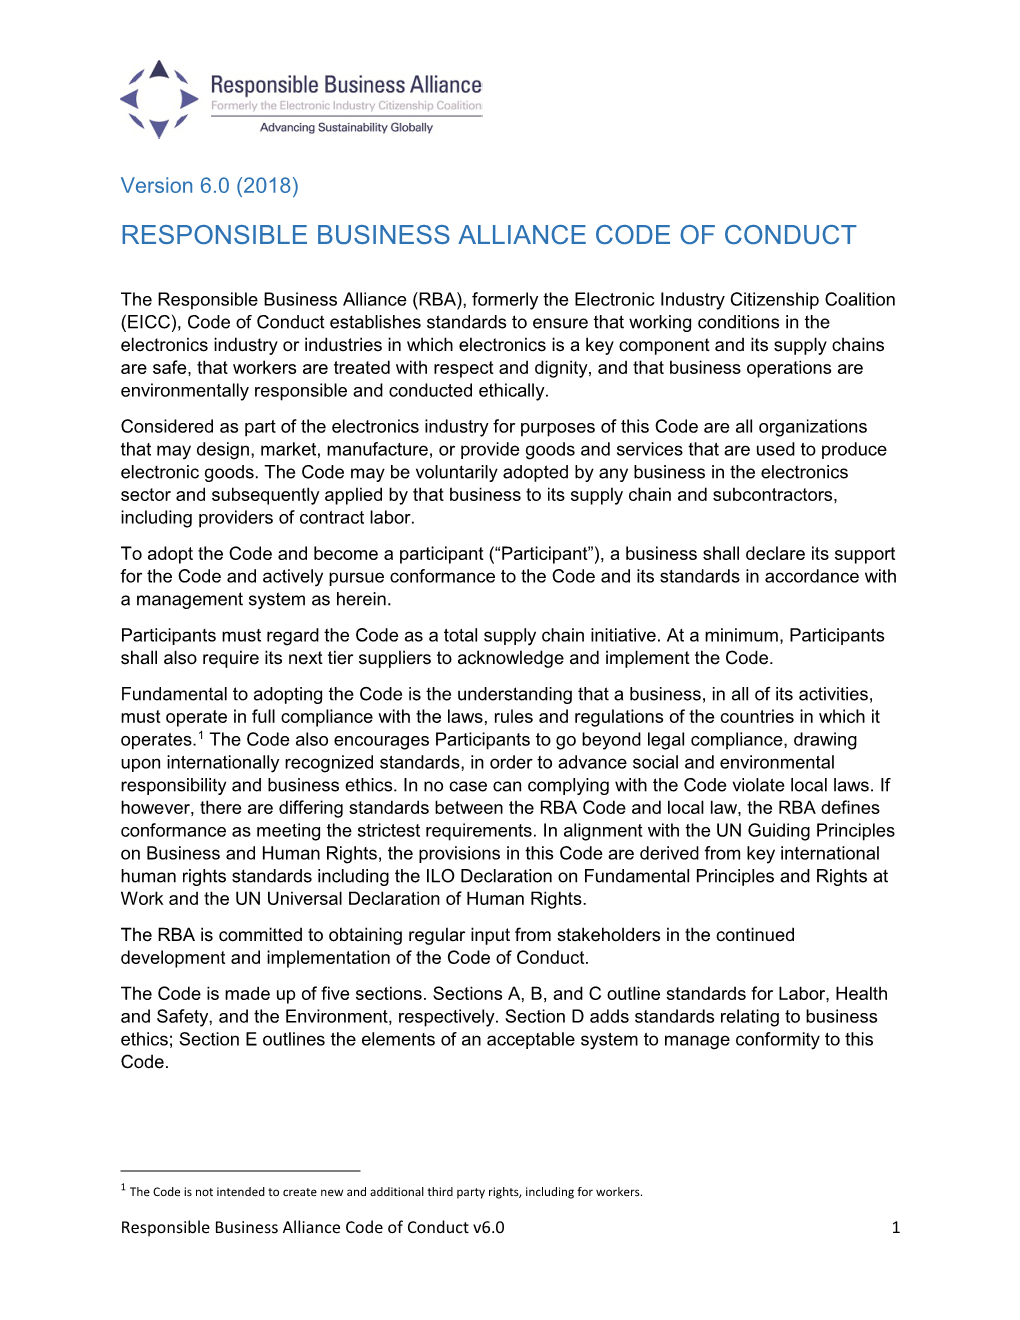 RBA Code of Conduct Was Initially Developed by a Number of Companies Engaged in the Manufacture of Electronics Products Between June and October 2004